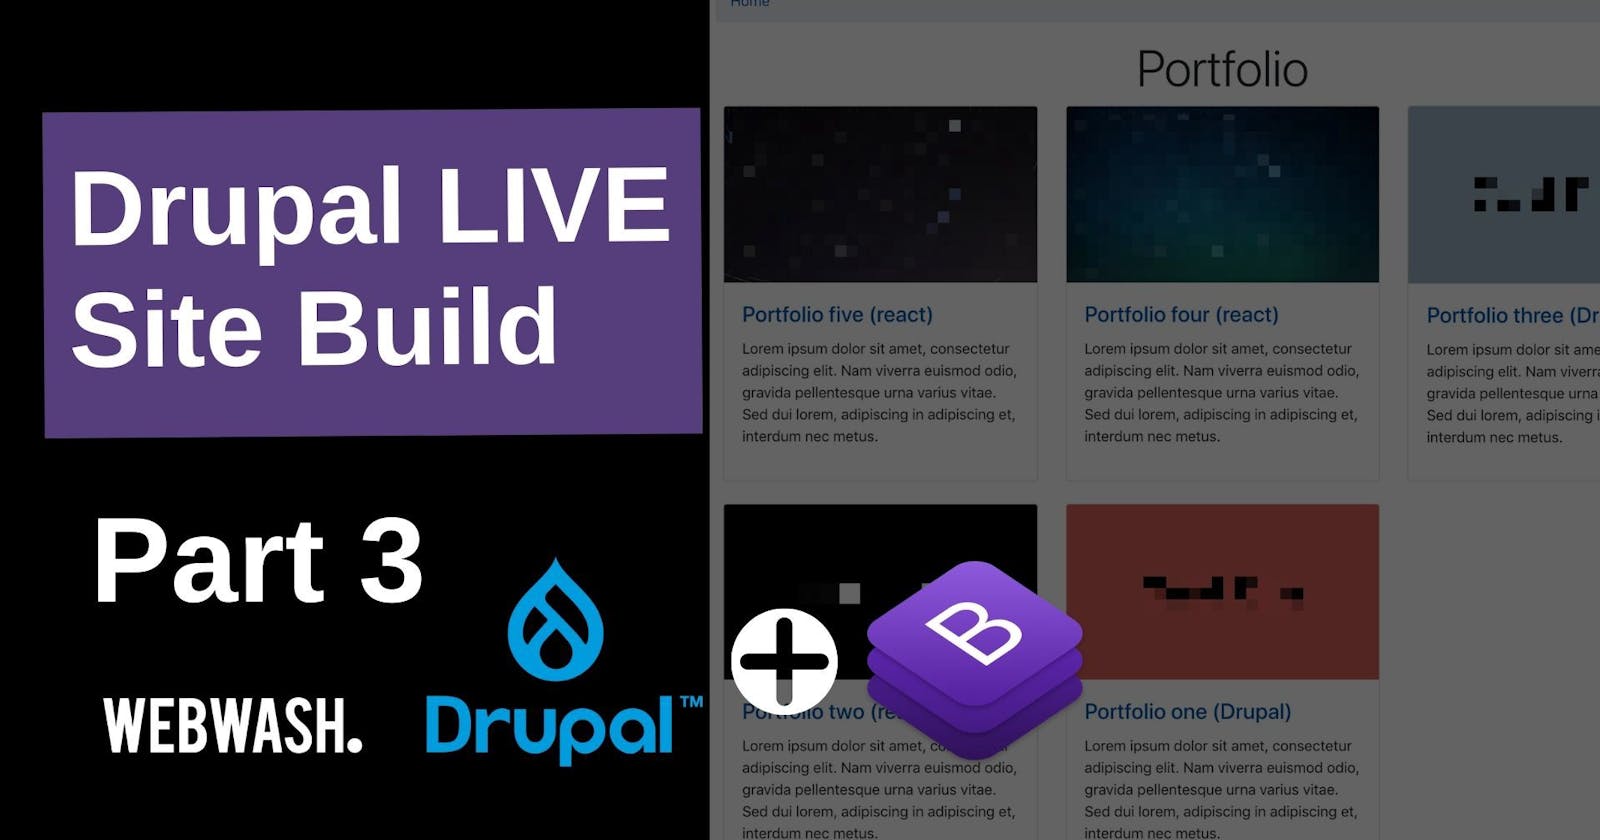 Drupal Live Site Build (Part 3) — Create Bootstrap Grid using Views and Display Related Content